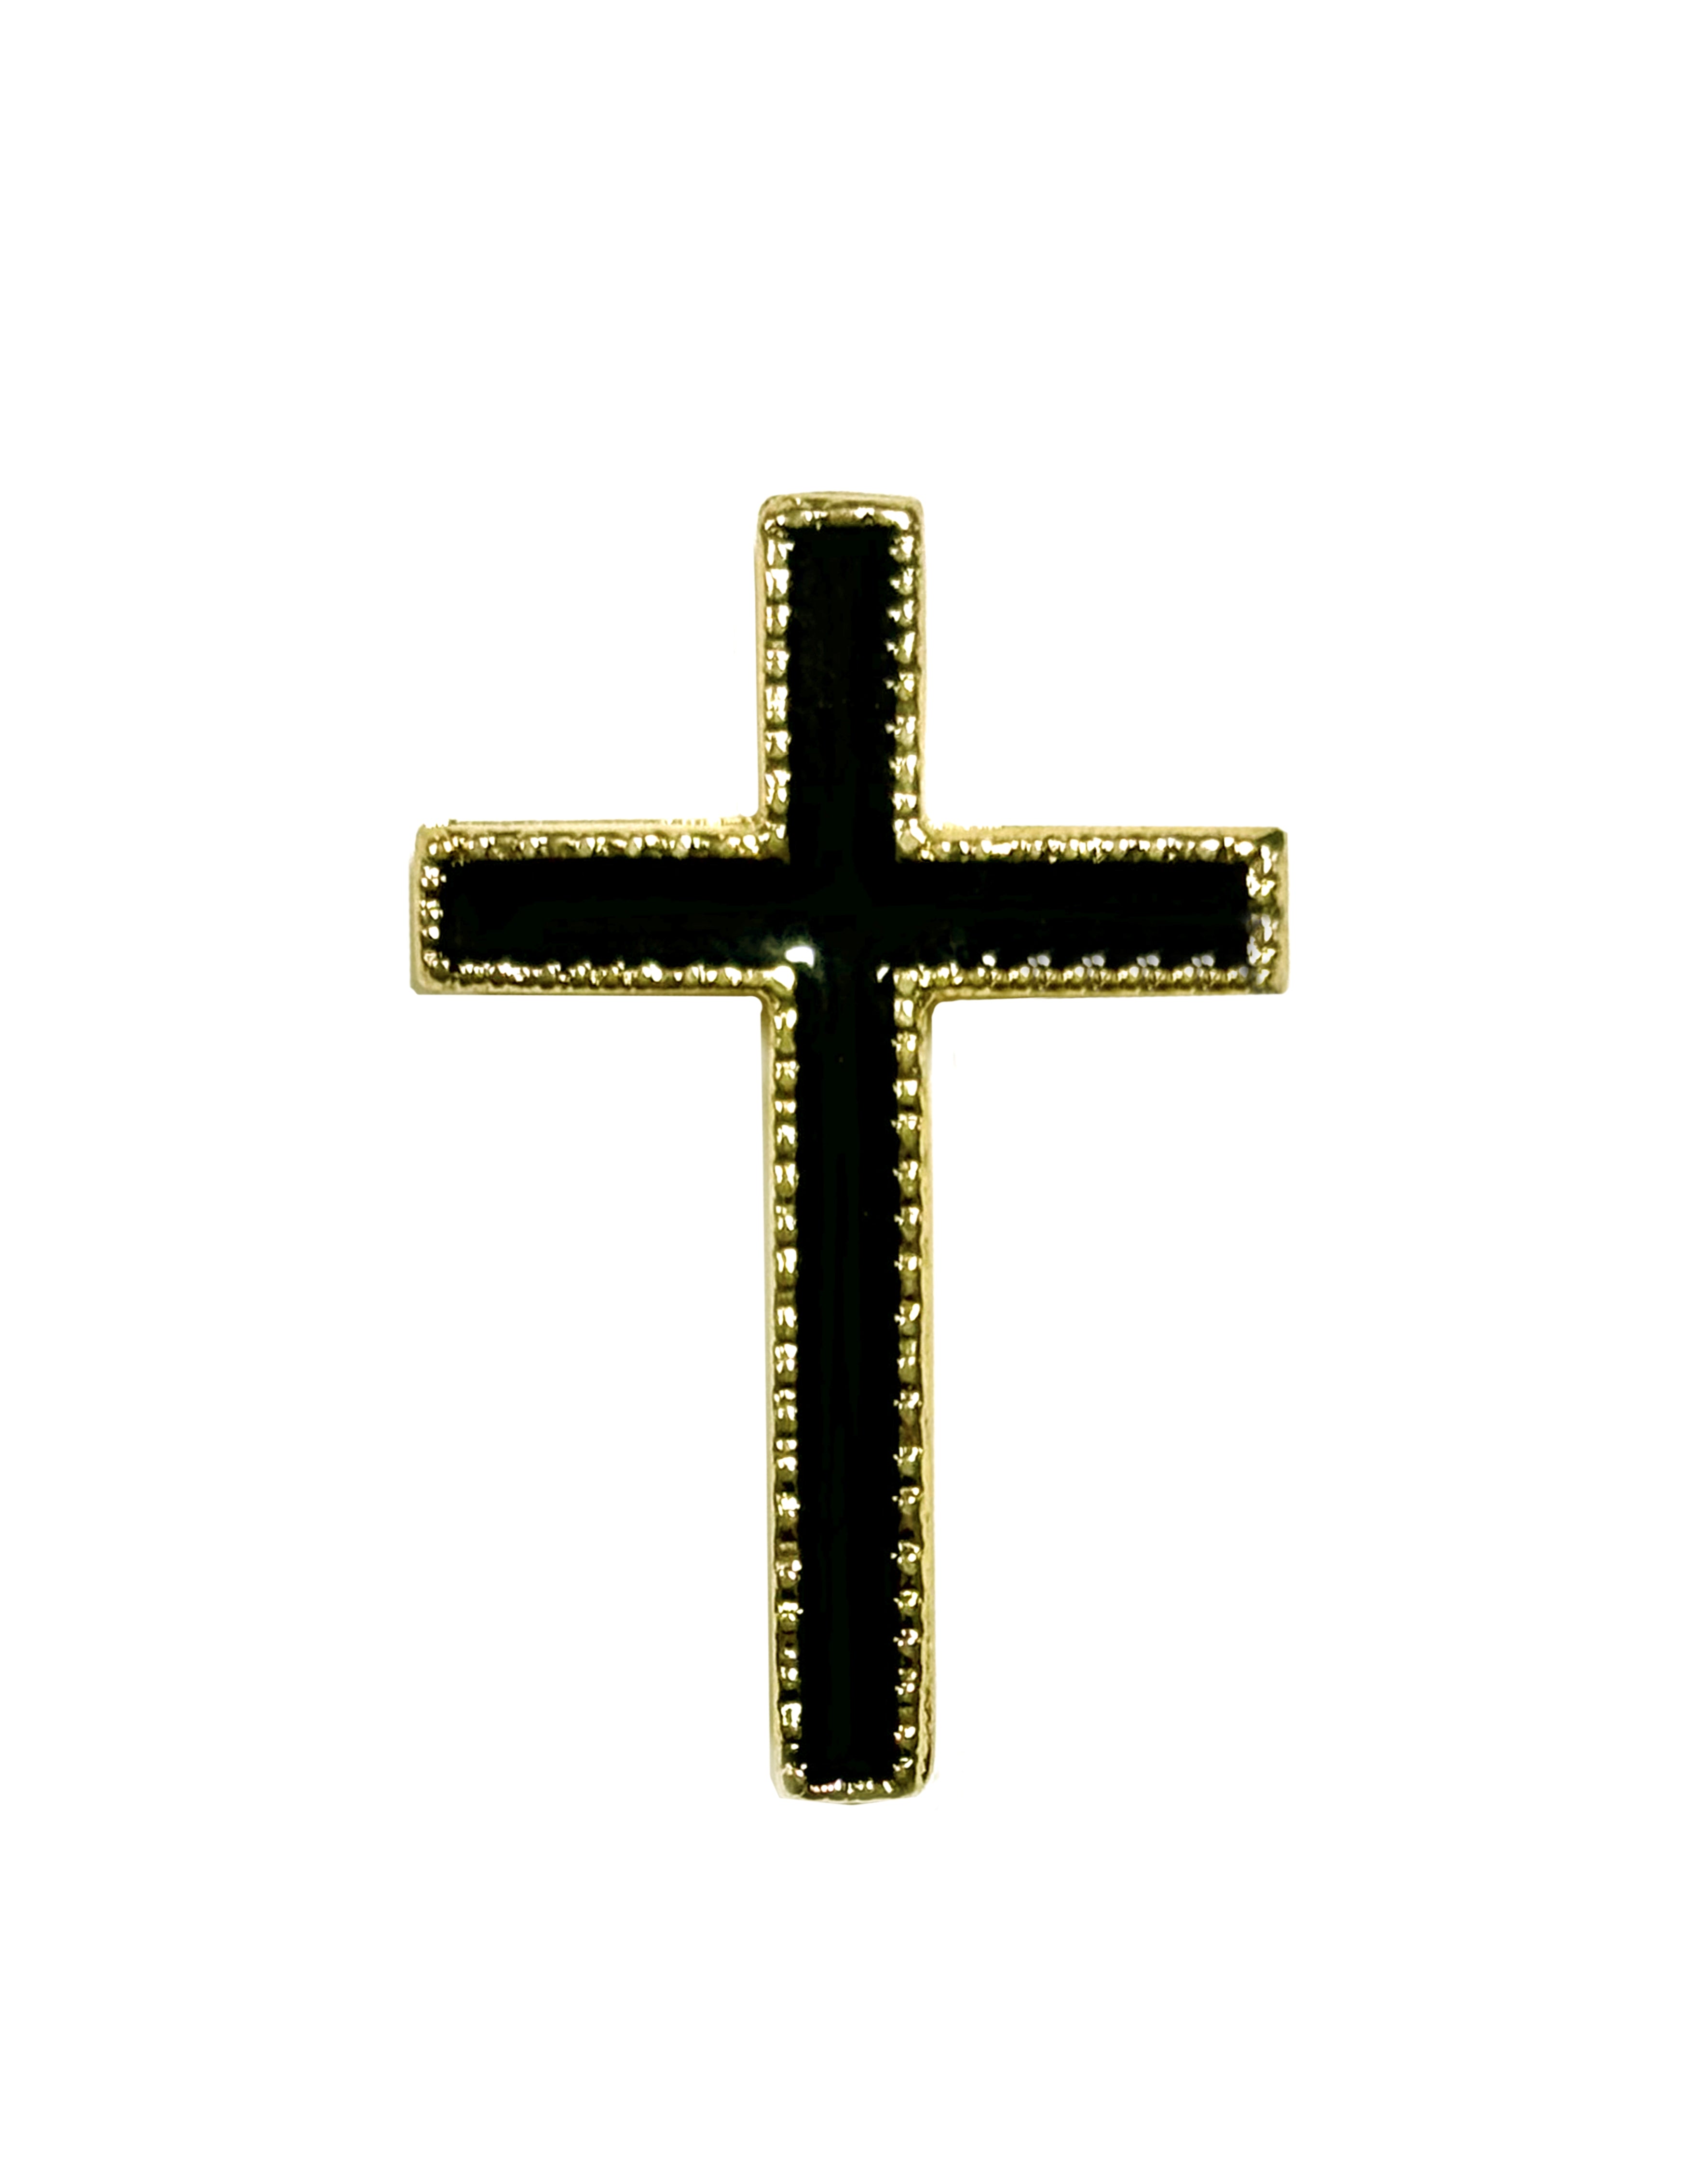 Black enamel and gold accent cross lapel pin